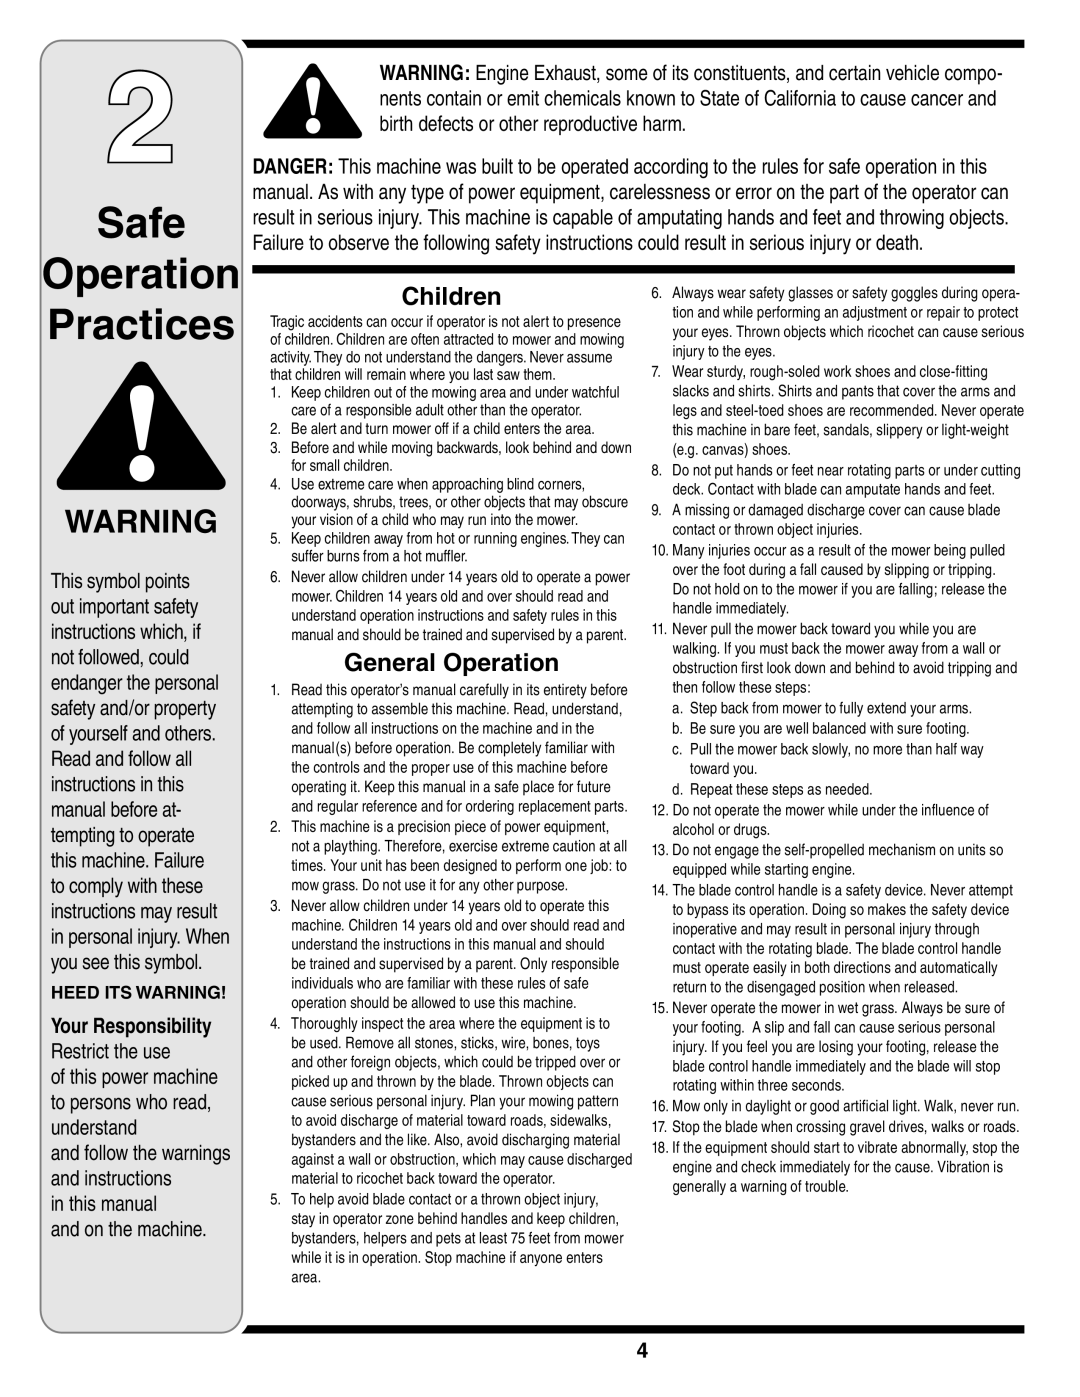 Cub Cadet 109 warranty Safe Operation, Practices, Children, General Operation, Heed Its Warning 